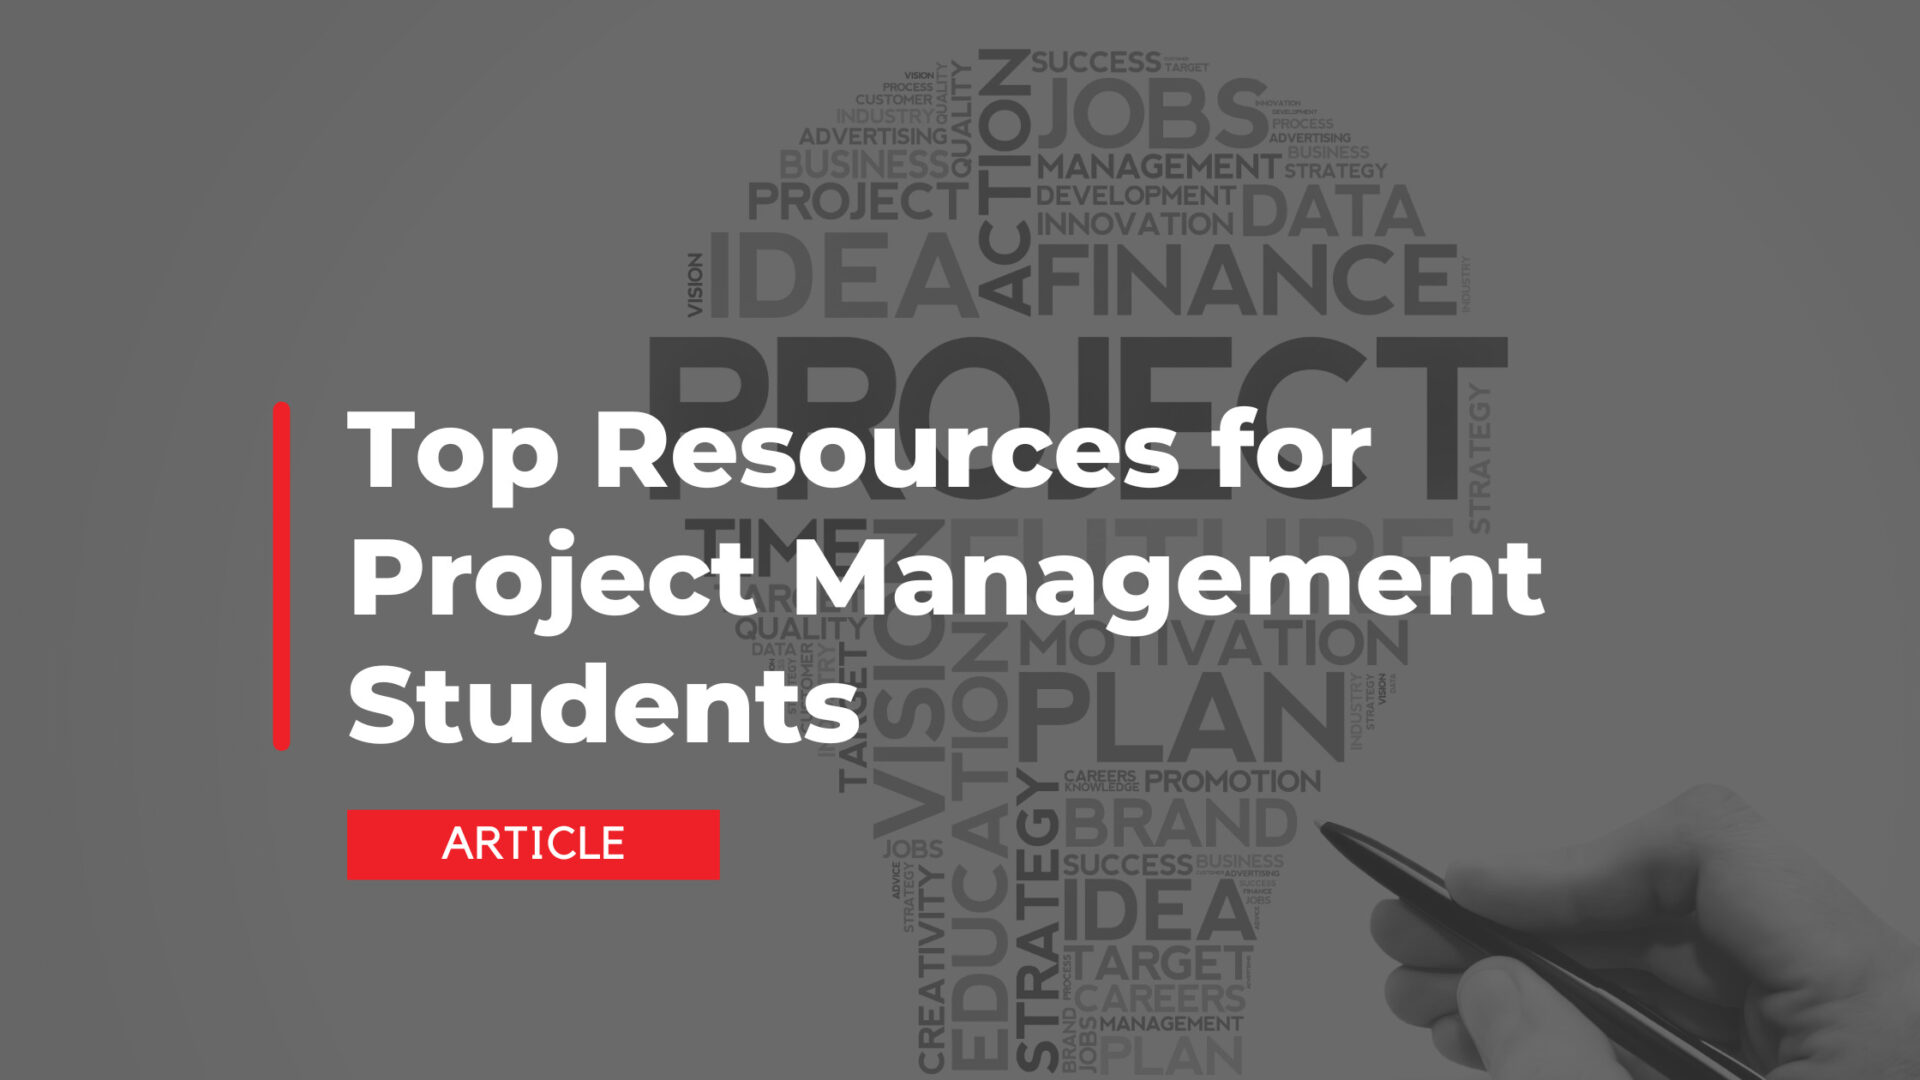 Top Resources for Project Management Students